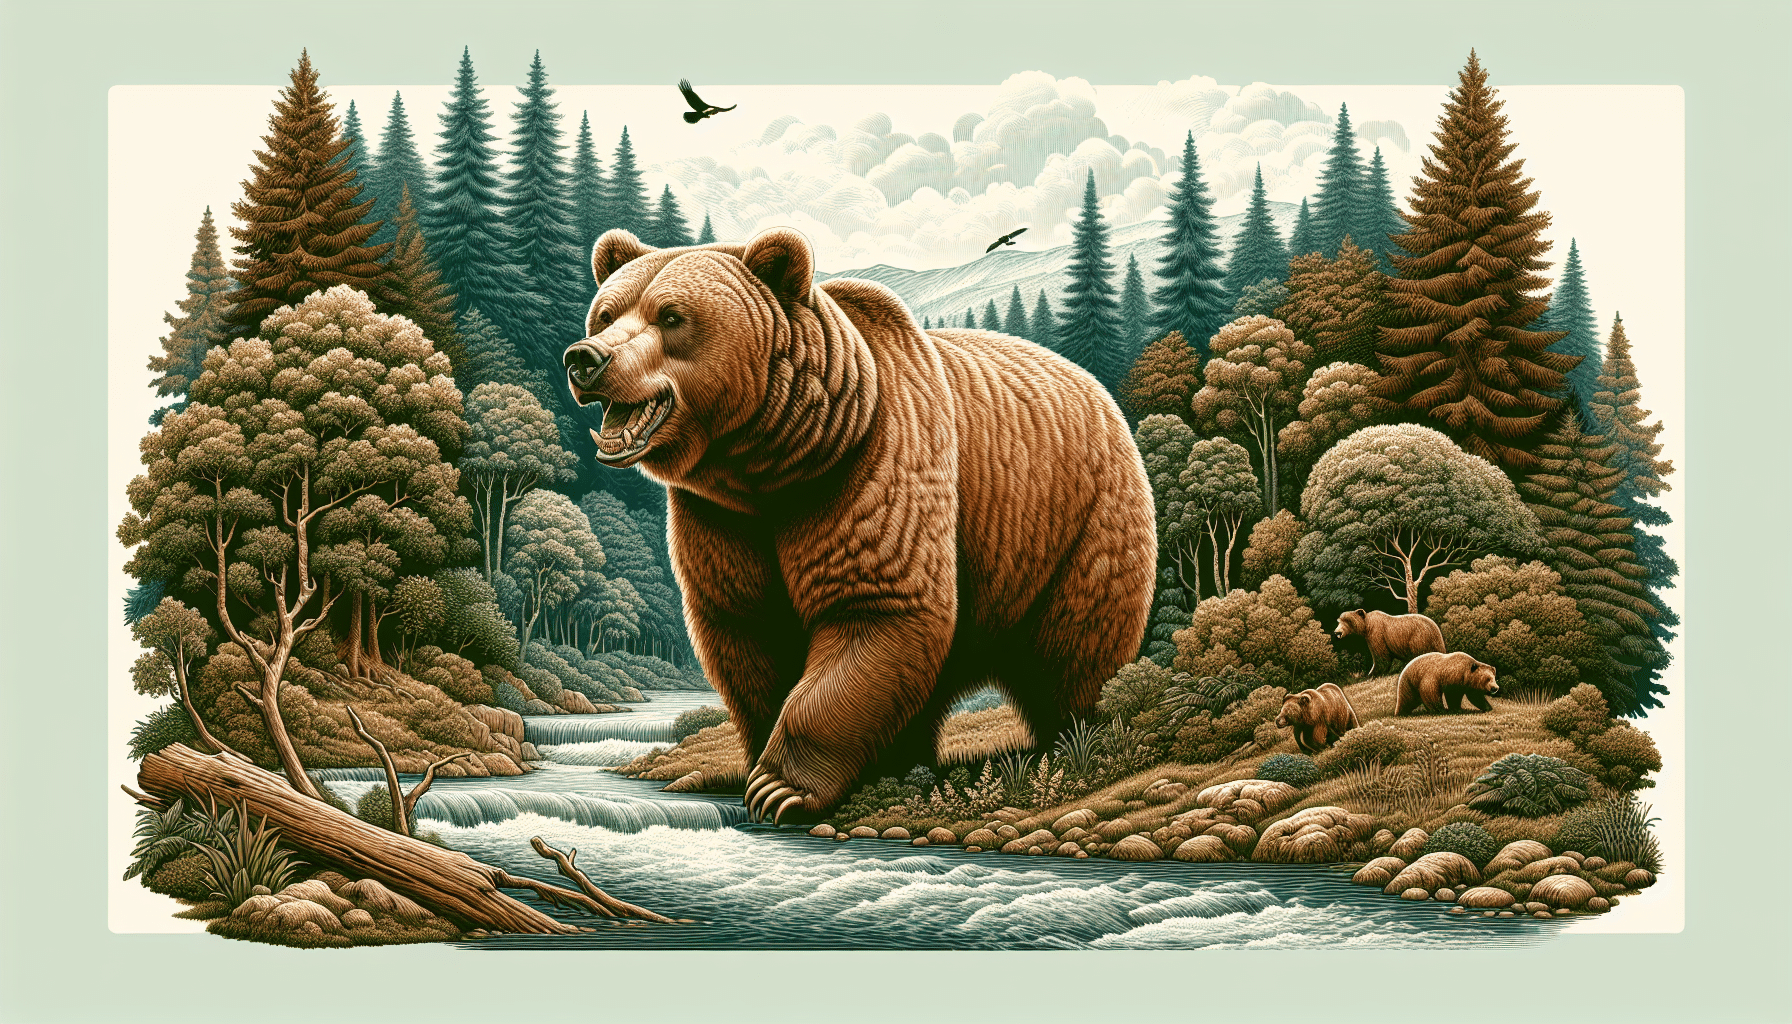 A detailed and accurate representation of a brown bear in its natural habitat, such as a dense forest or beside a flowing river. The bear would be depicted in a realistic manner, showcasing its immense strength and power, thus signifying the potential danger they can pose. Elements such as the bear's large claws, strong jaw, and muscular formation should be emphasized. The surrounding natural environment should also be rich in detail, showcasing various types of trees, plants, and features of the landscape. The image should not include any text, people, or brand names.